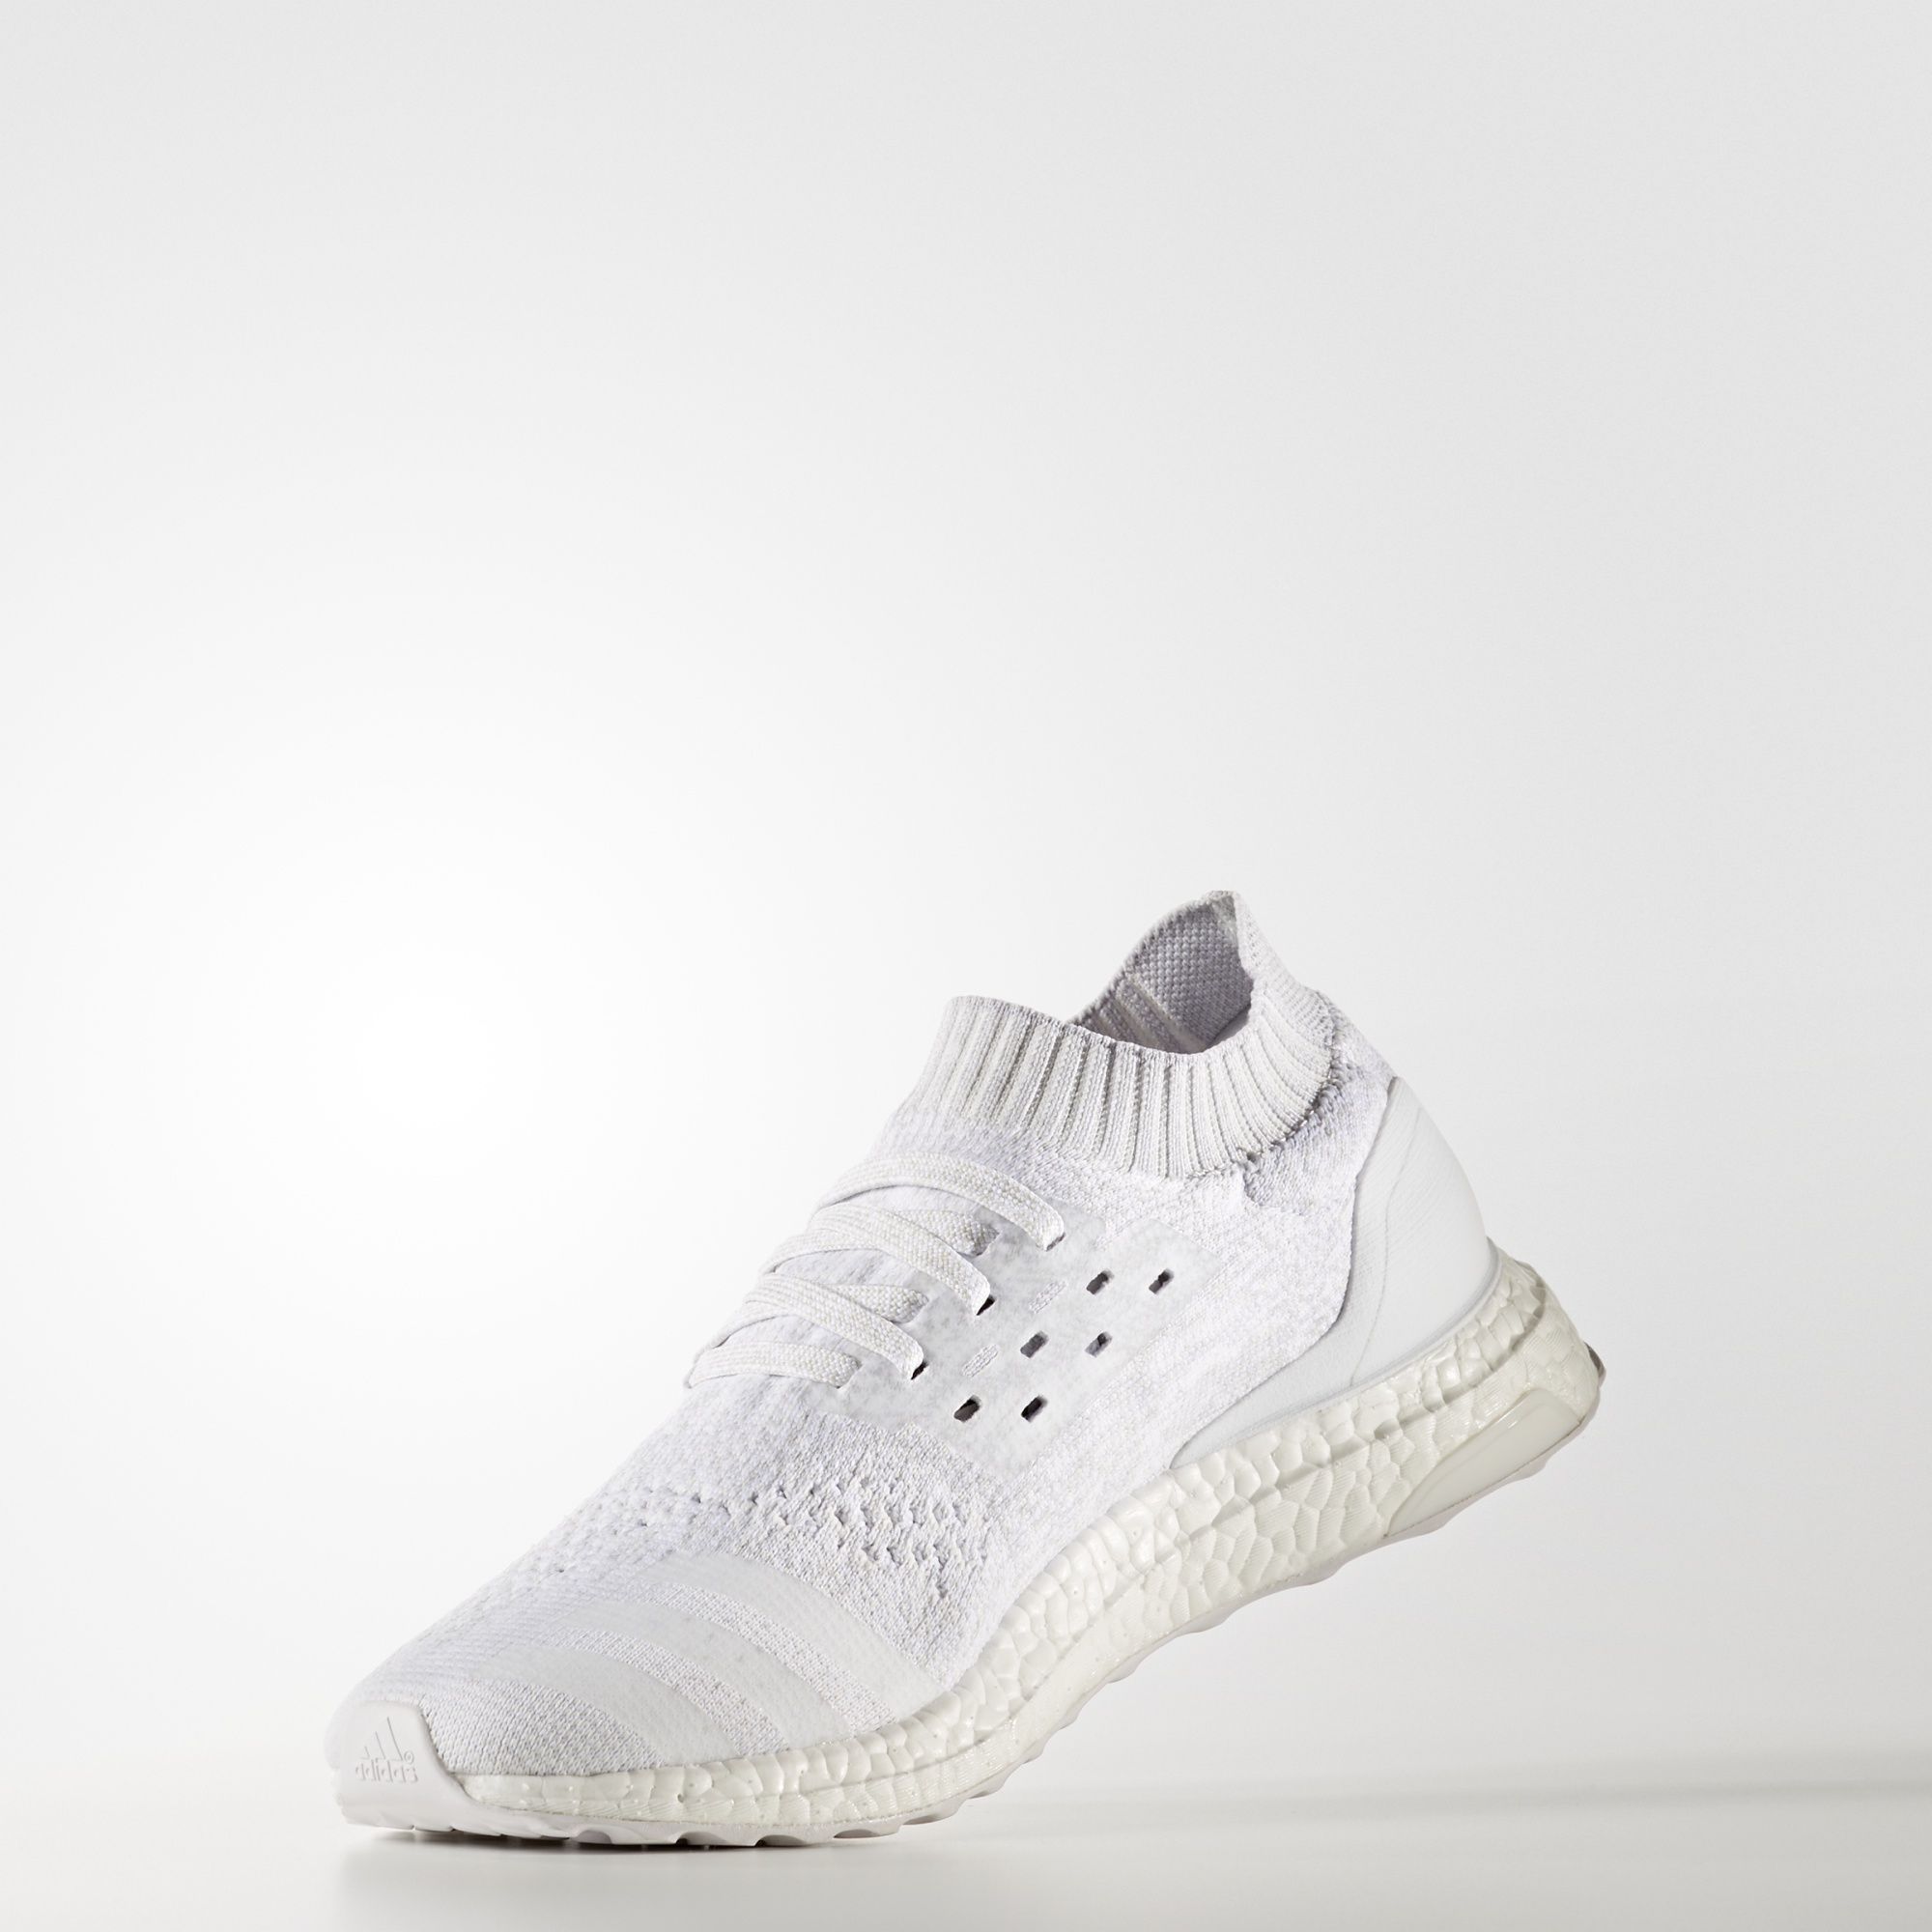 Adidas Ultra BOOST Uncaged
« Triple White »